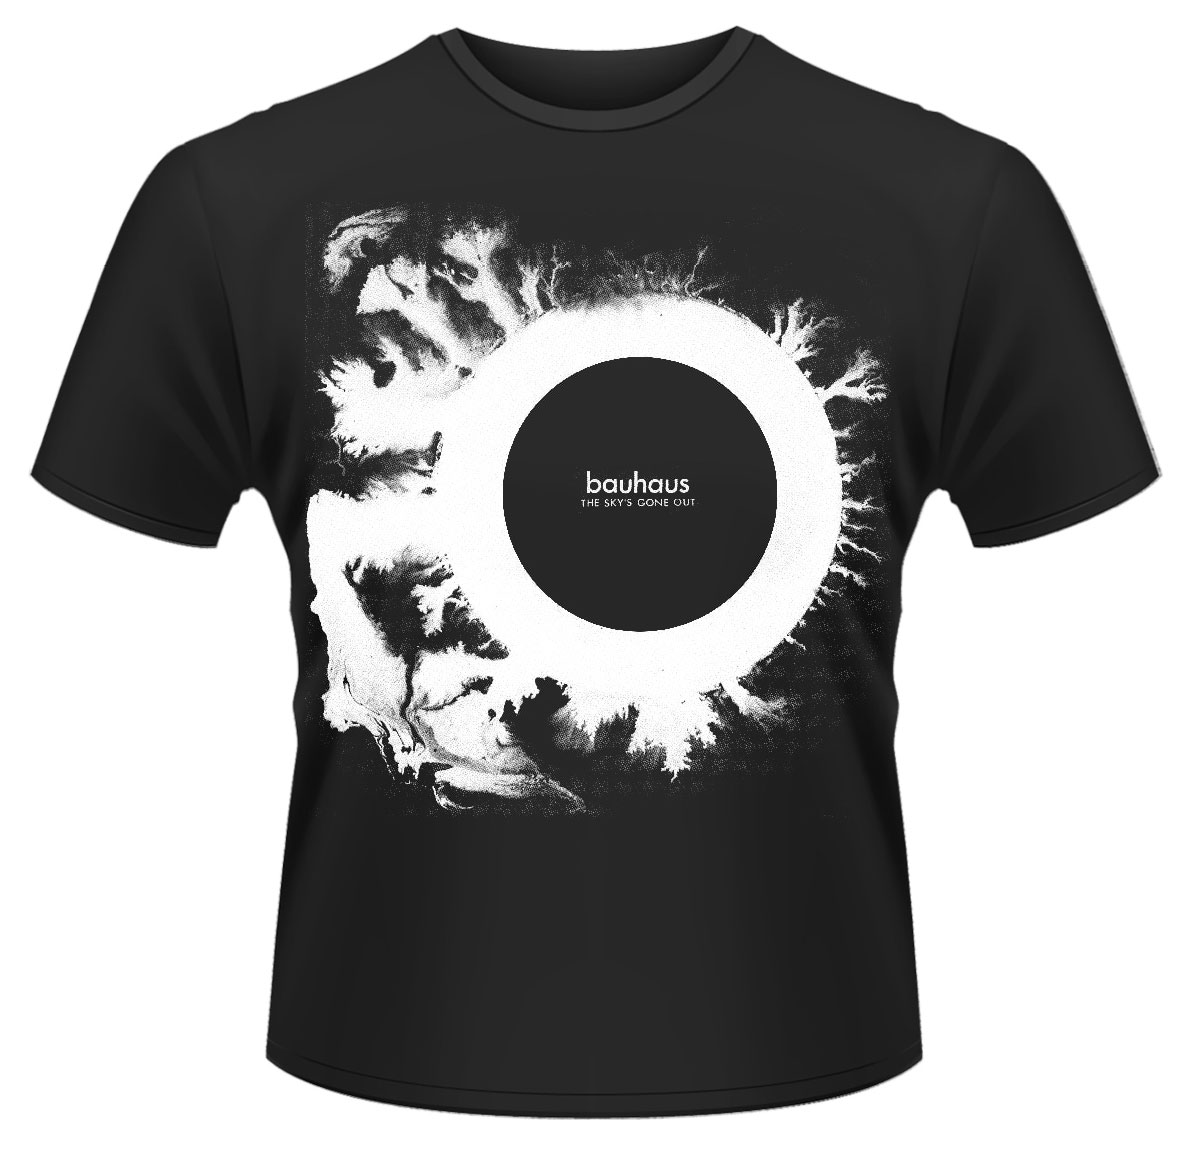 Bauhaus 'The Sky's Gone Out' T-Shirt - NEW & OFFICIAL! - Afbeelding 1 van 1